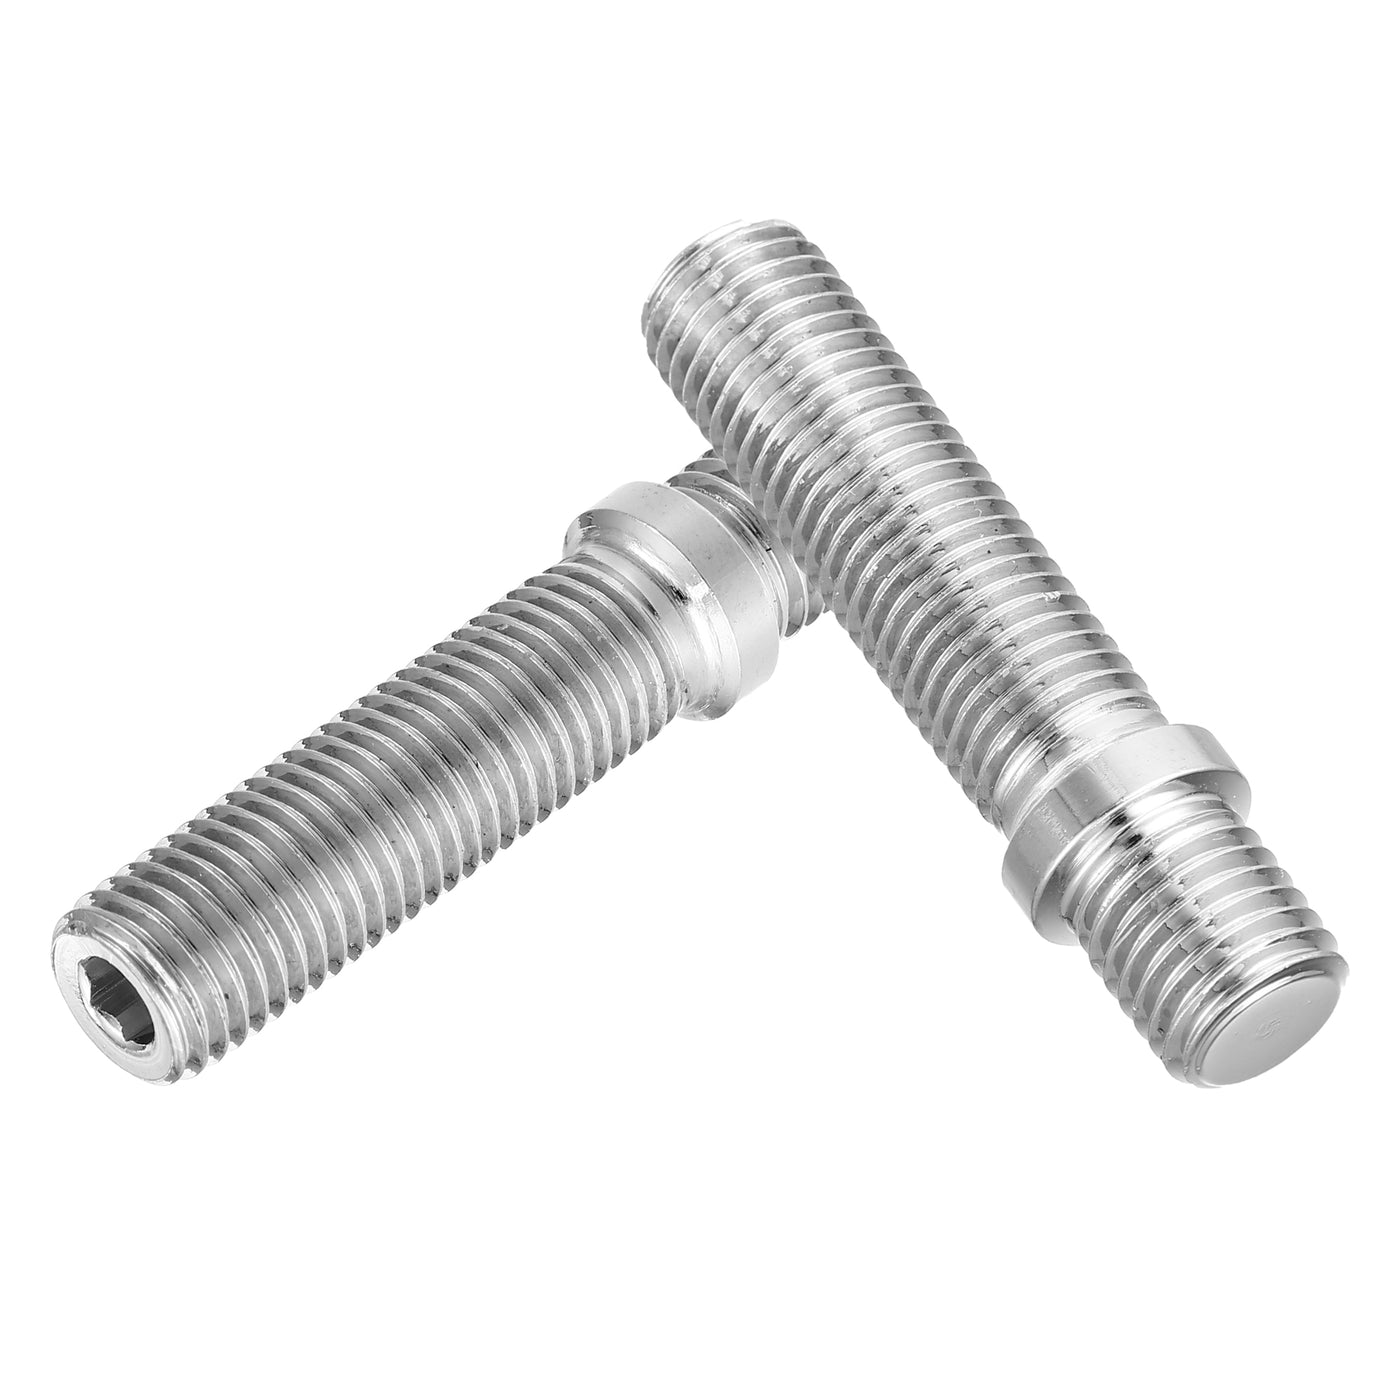 ACROPIX M12x1.5 to M12x1.5 58mm Wheel Stud  Fit for BMW - Pack of 10 Silver Tone